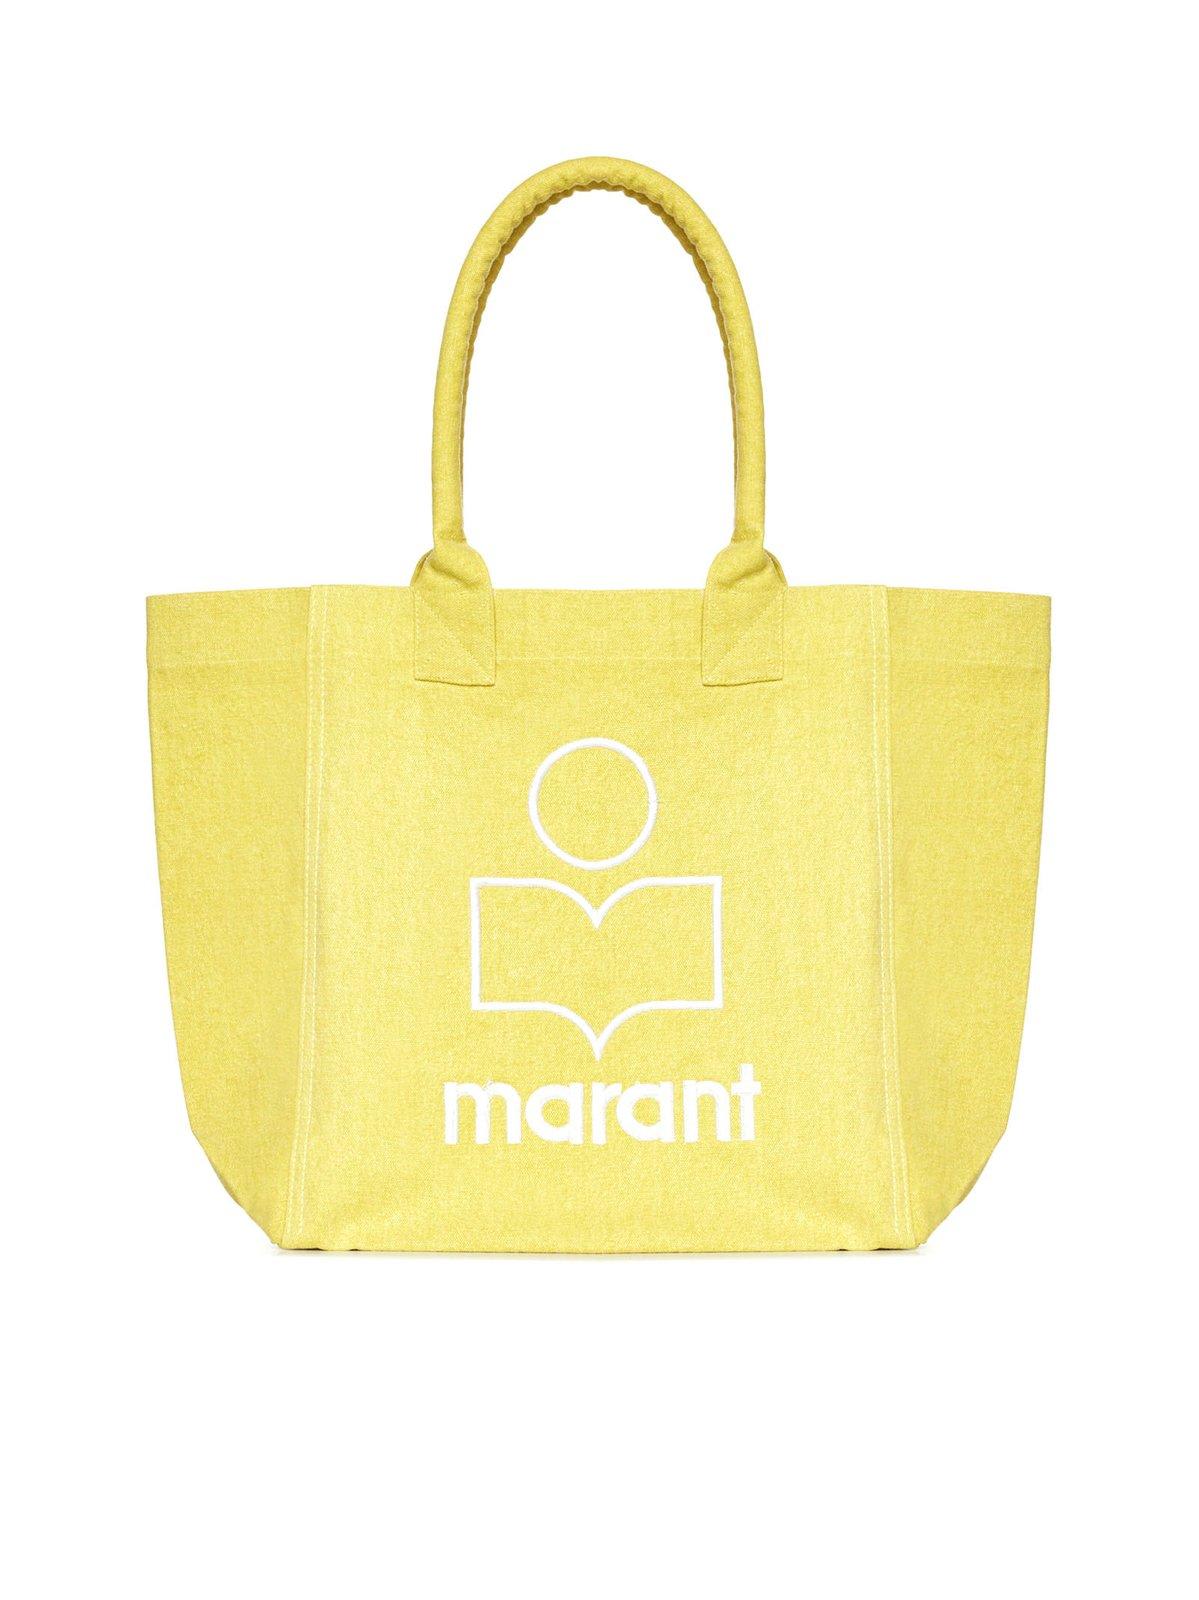 ISABEL MARANT YENKY LOGO EMBROIDERED TOTE BAG